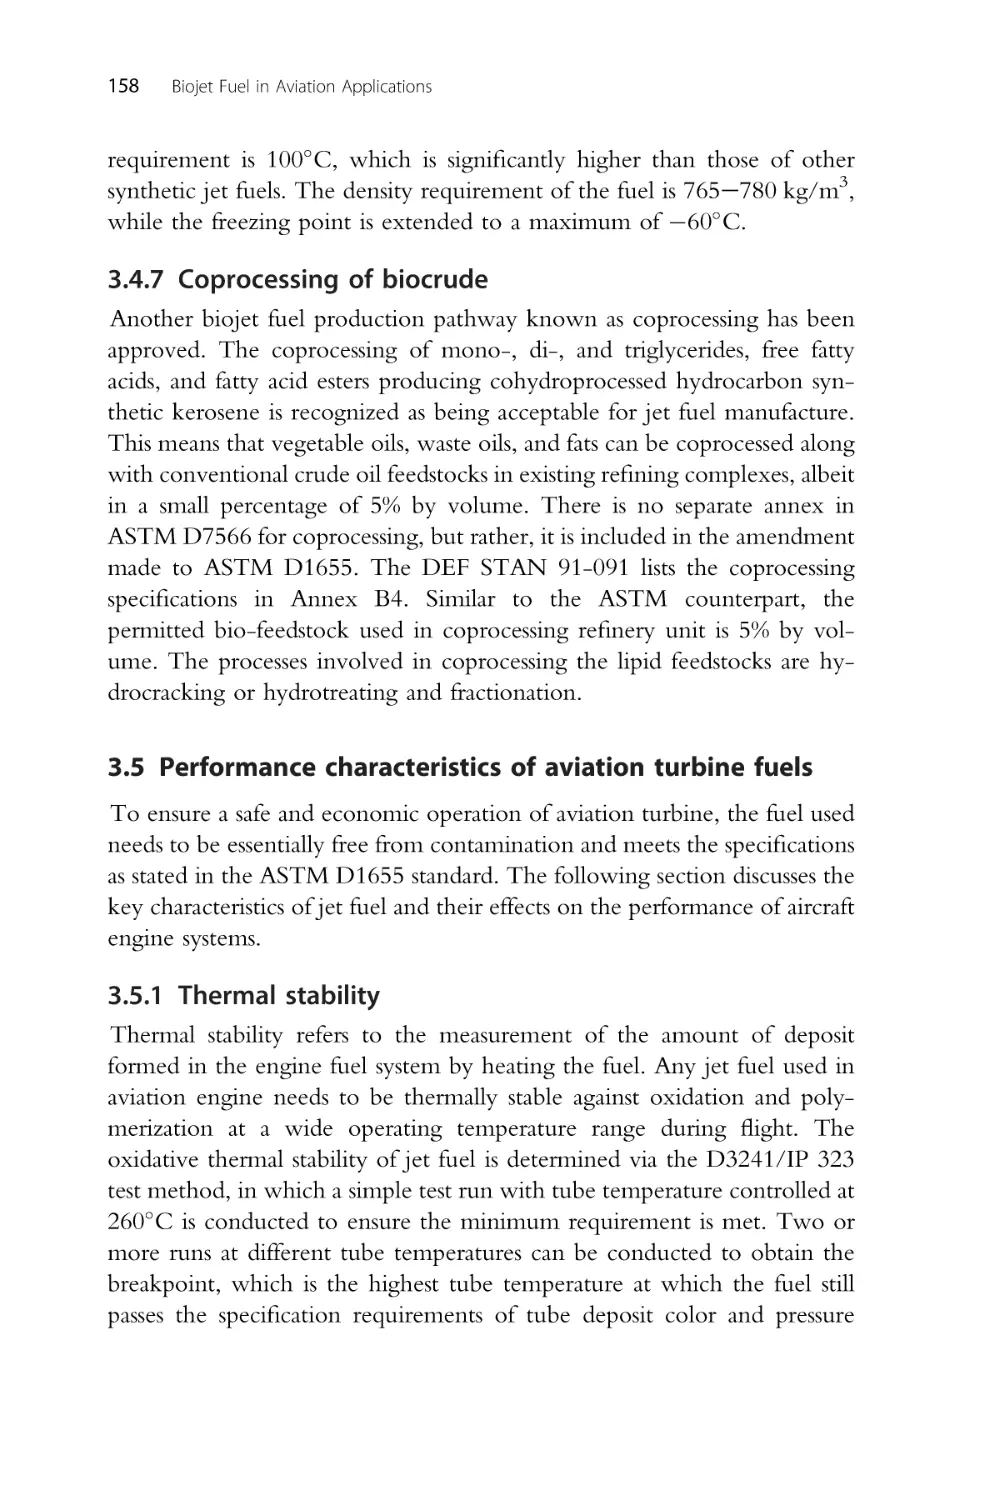 3.4.7 Coprocessing of biocrude
3.5 Performance characteristics of aviation turbine fuels
3.5.1 Thermal stability